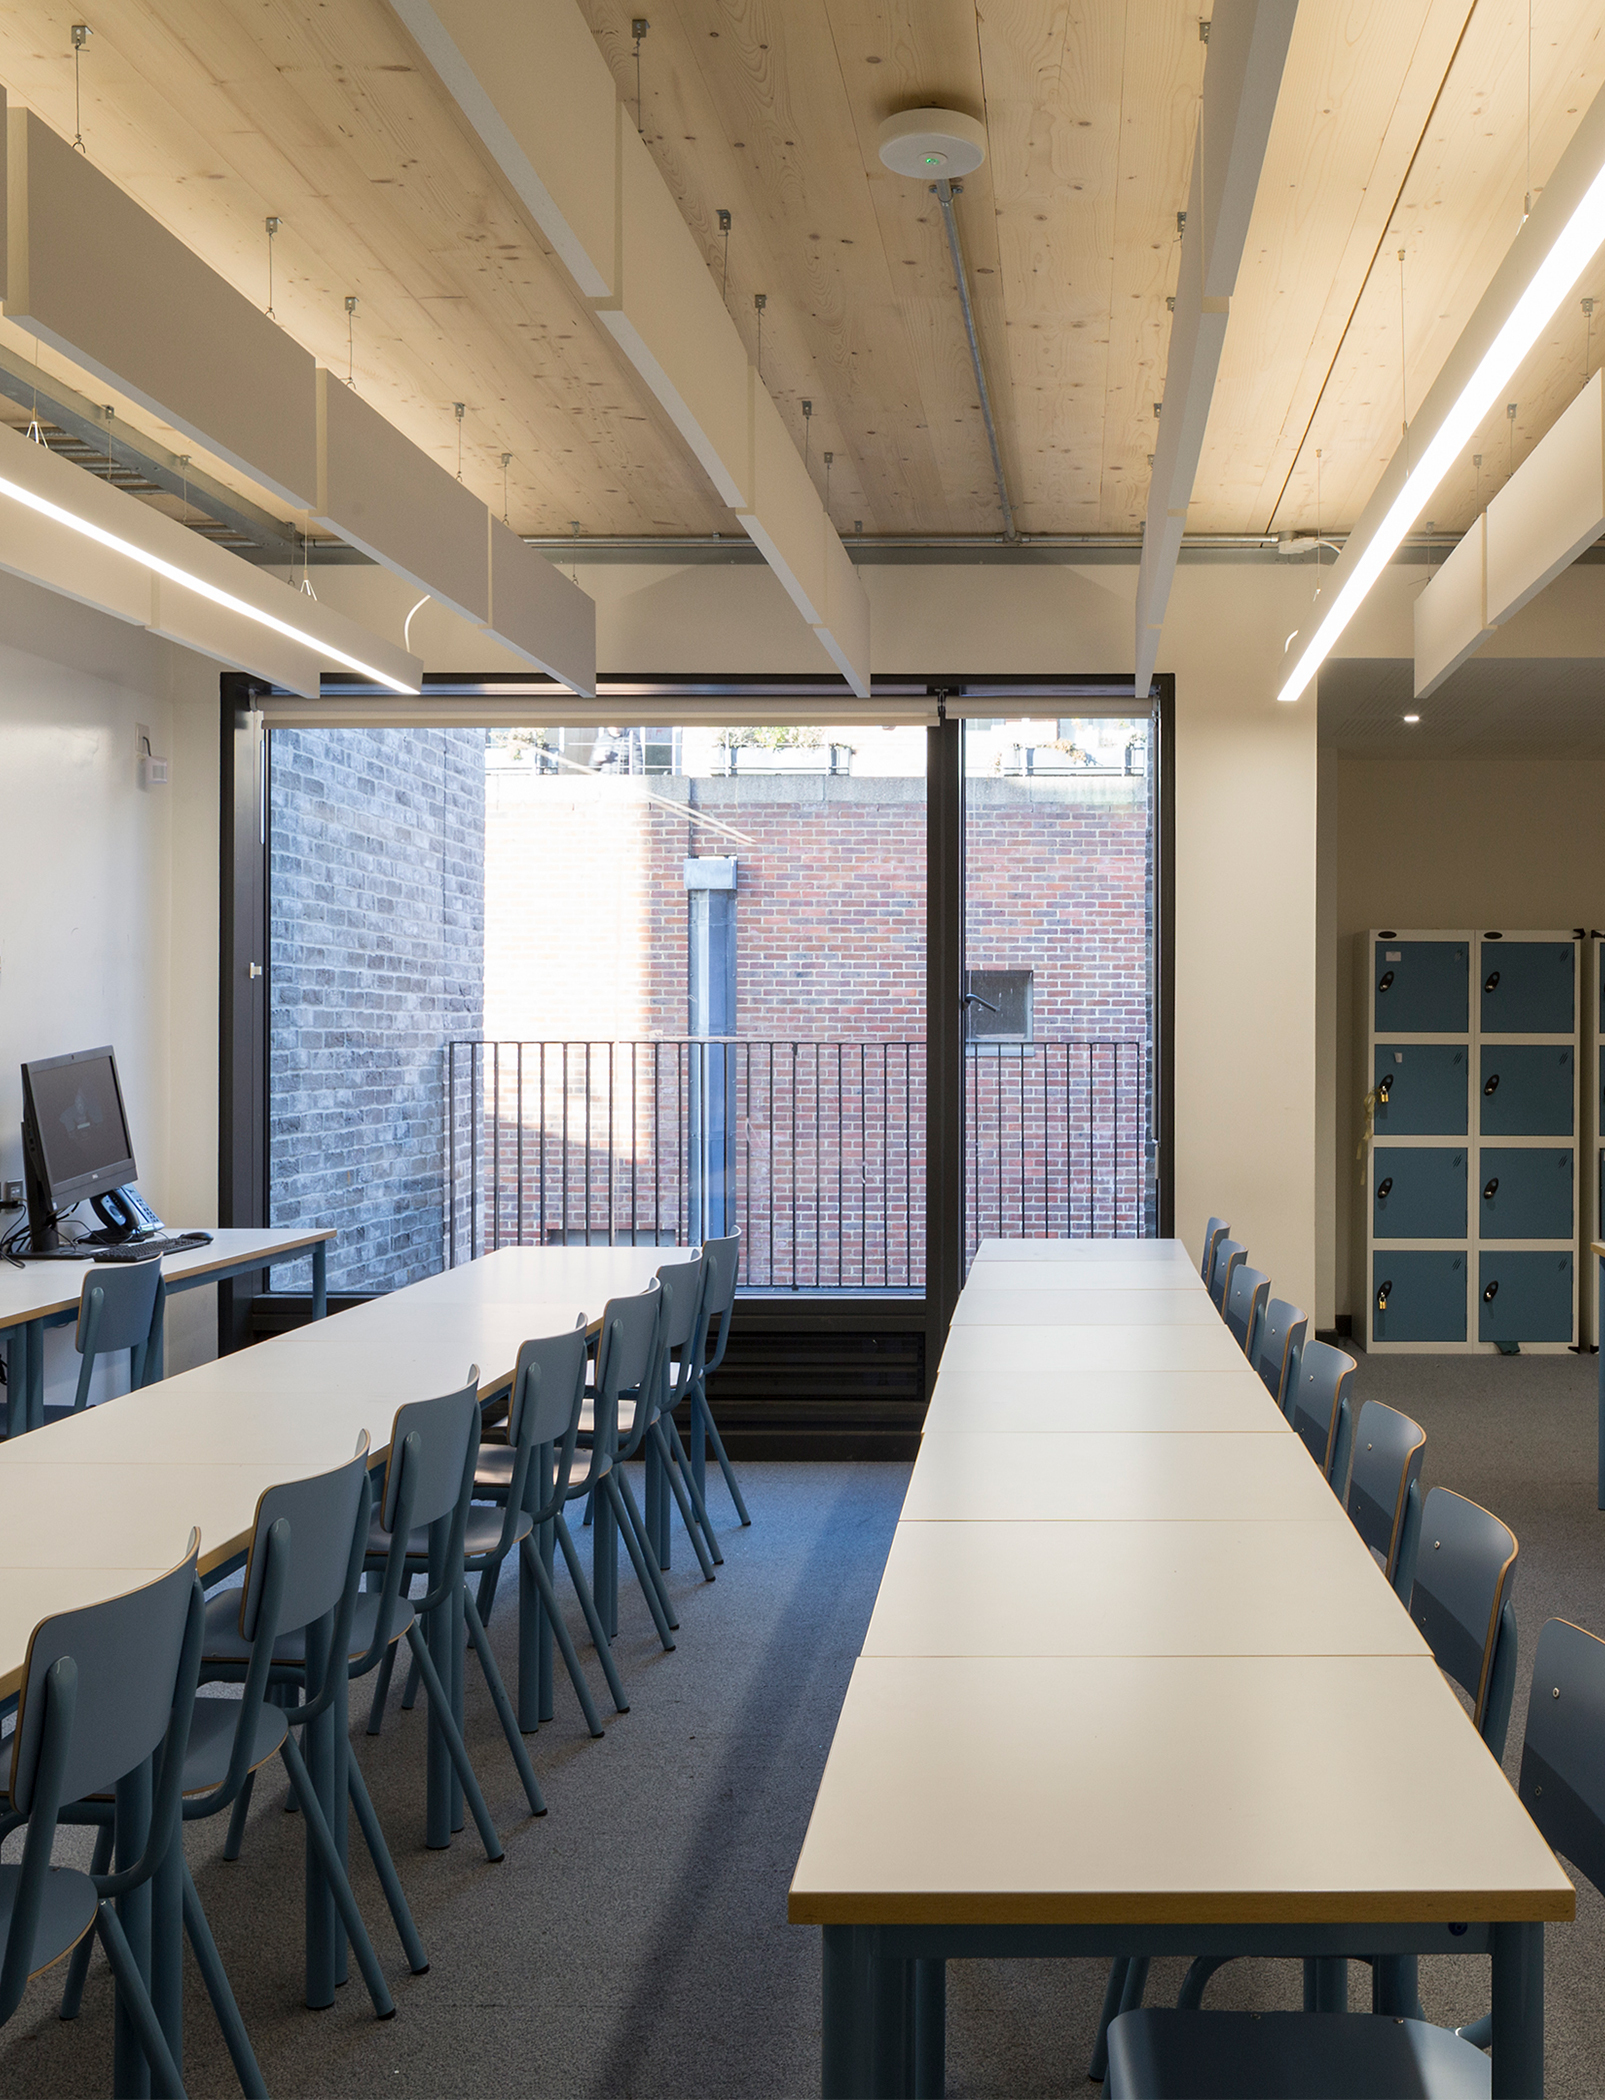 Classroom with window to outside street and overhead lighting, | CDC Studio Cambridge architects